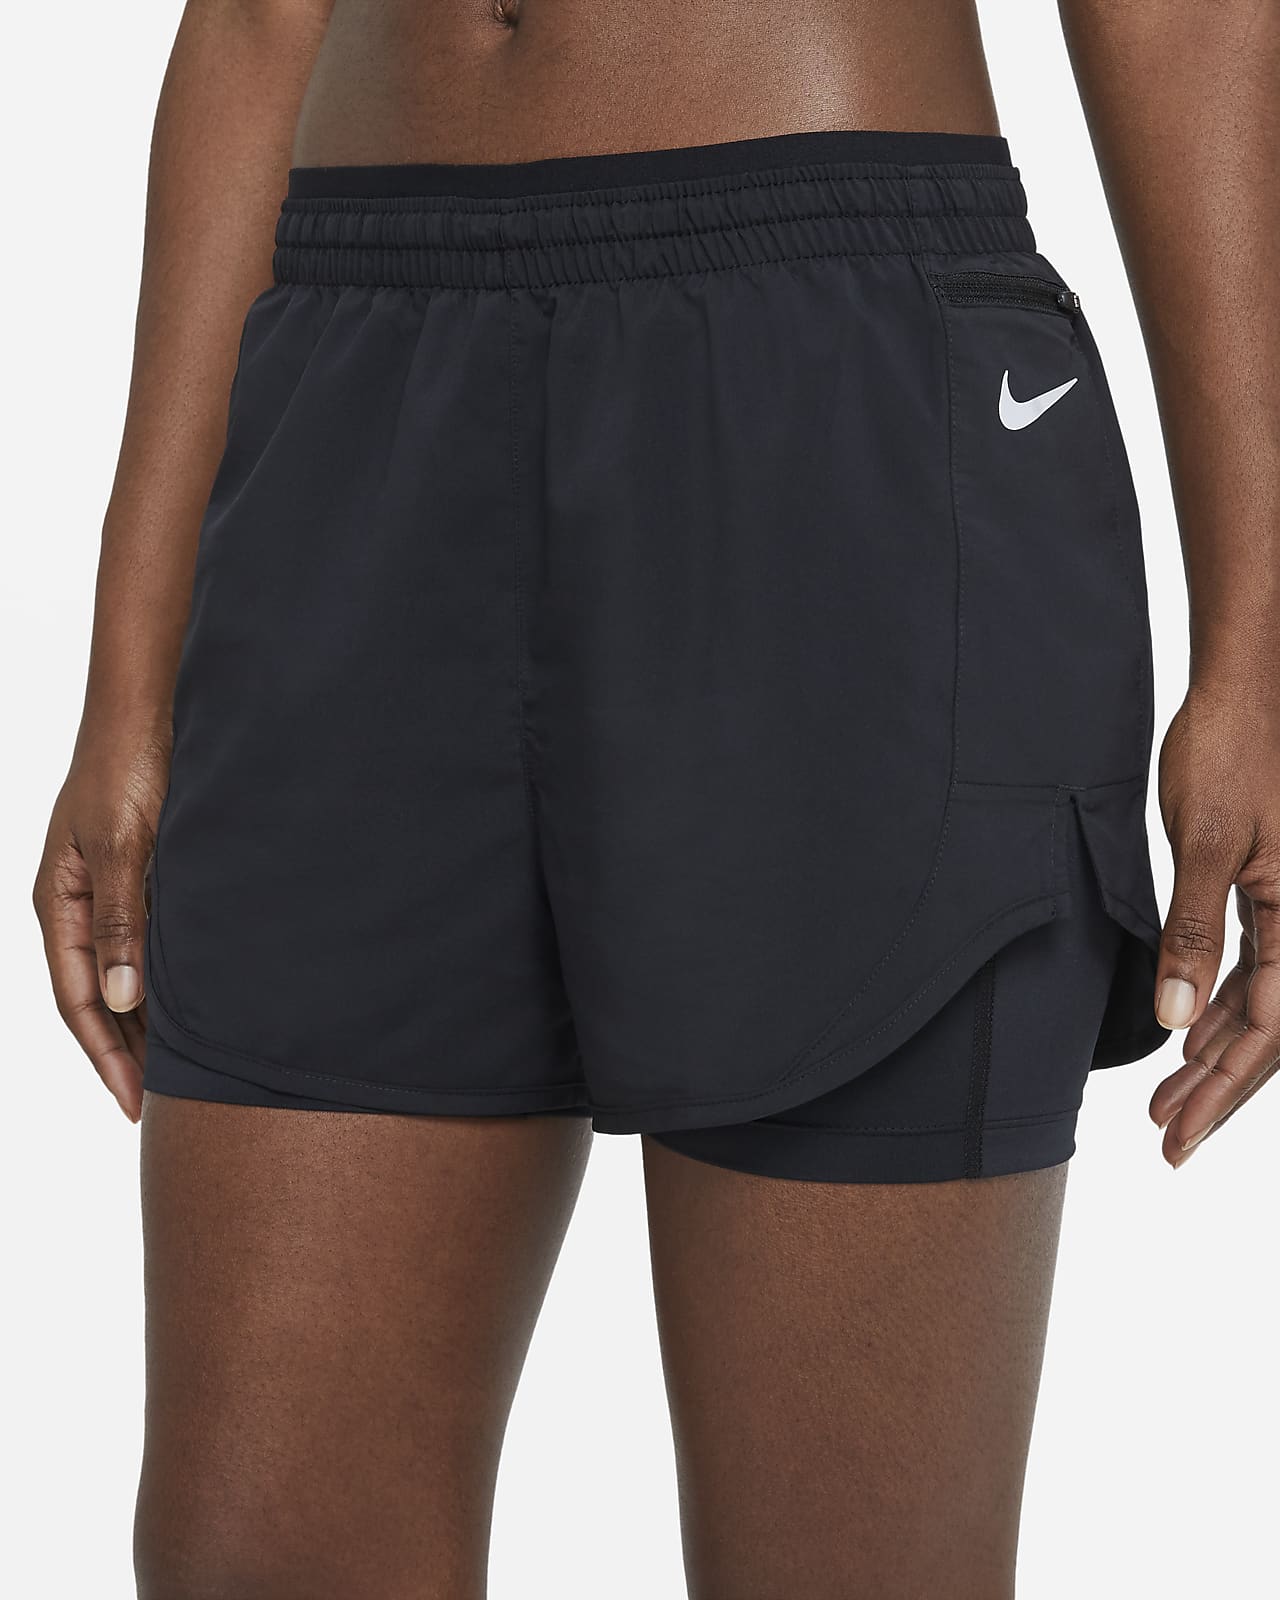 Nike Mens Tempo Split 2 Running Shorts with an internal brief